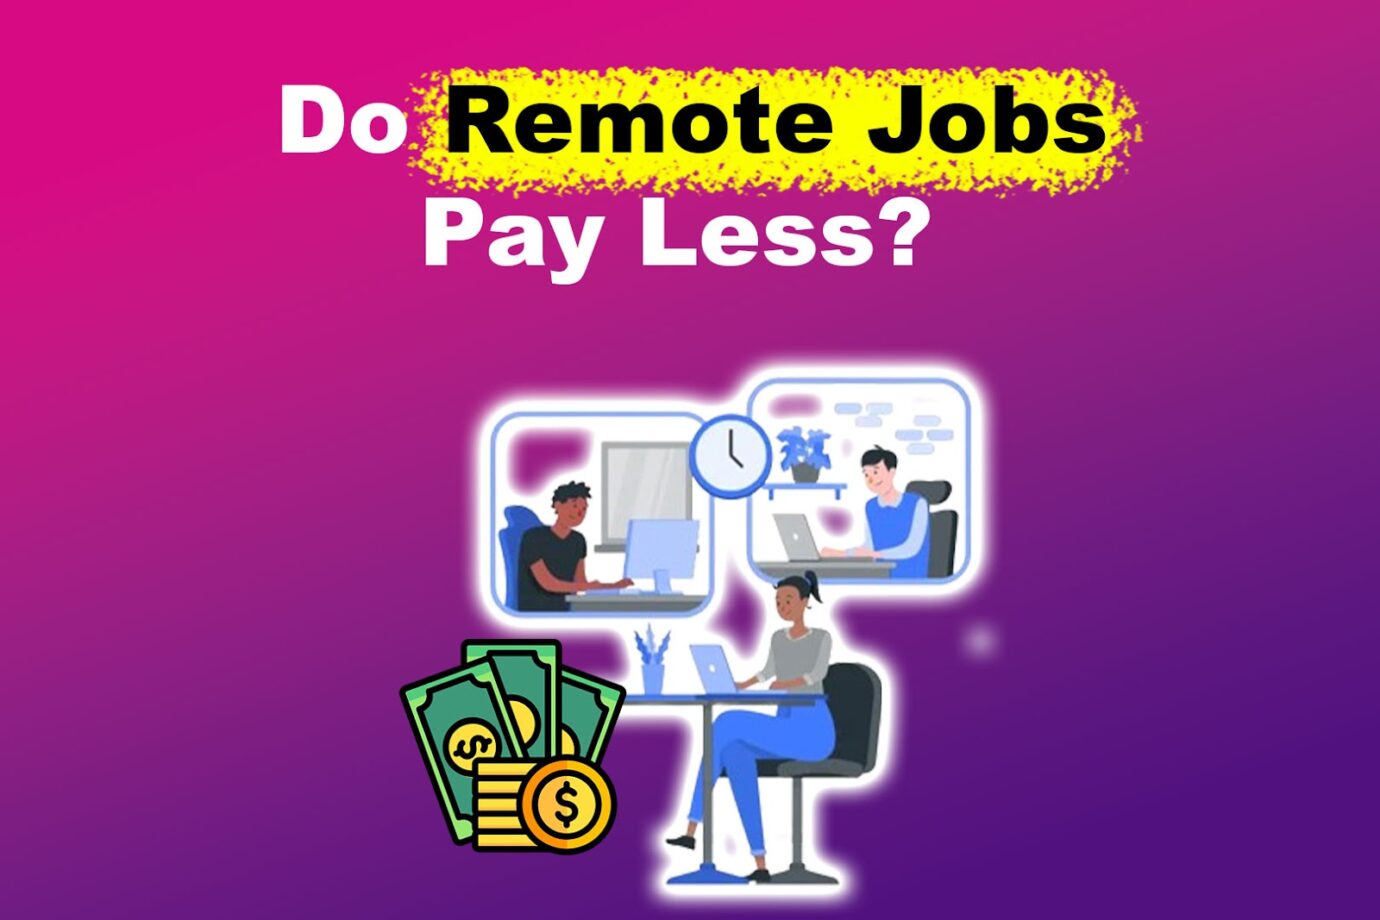 Does Remote Work Pay Less? [5 High-Paying Remote Jobs]